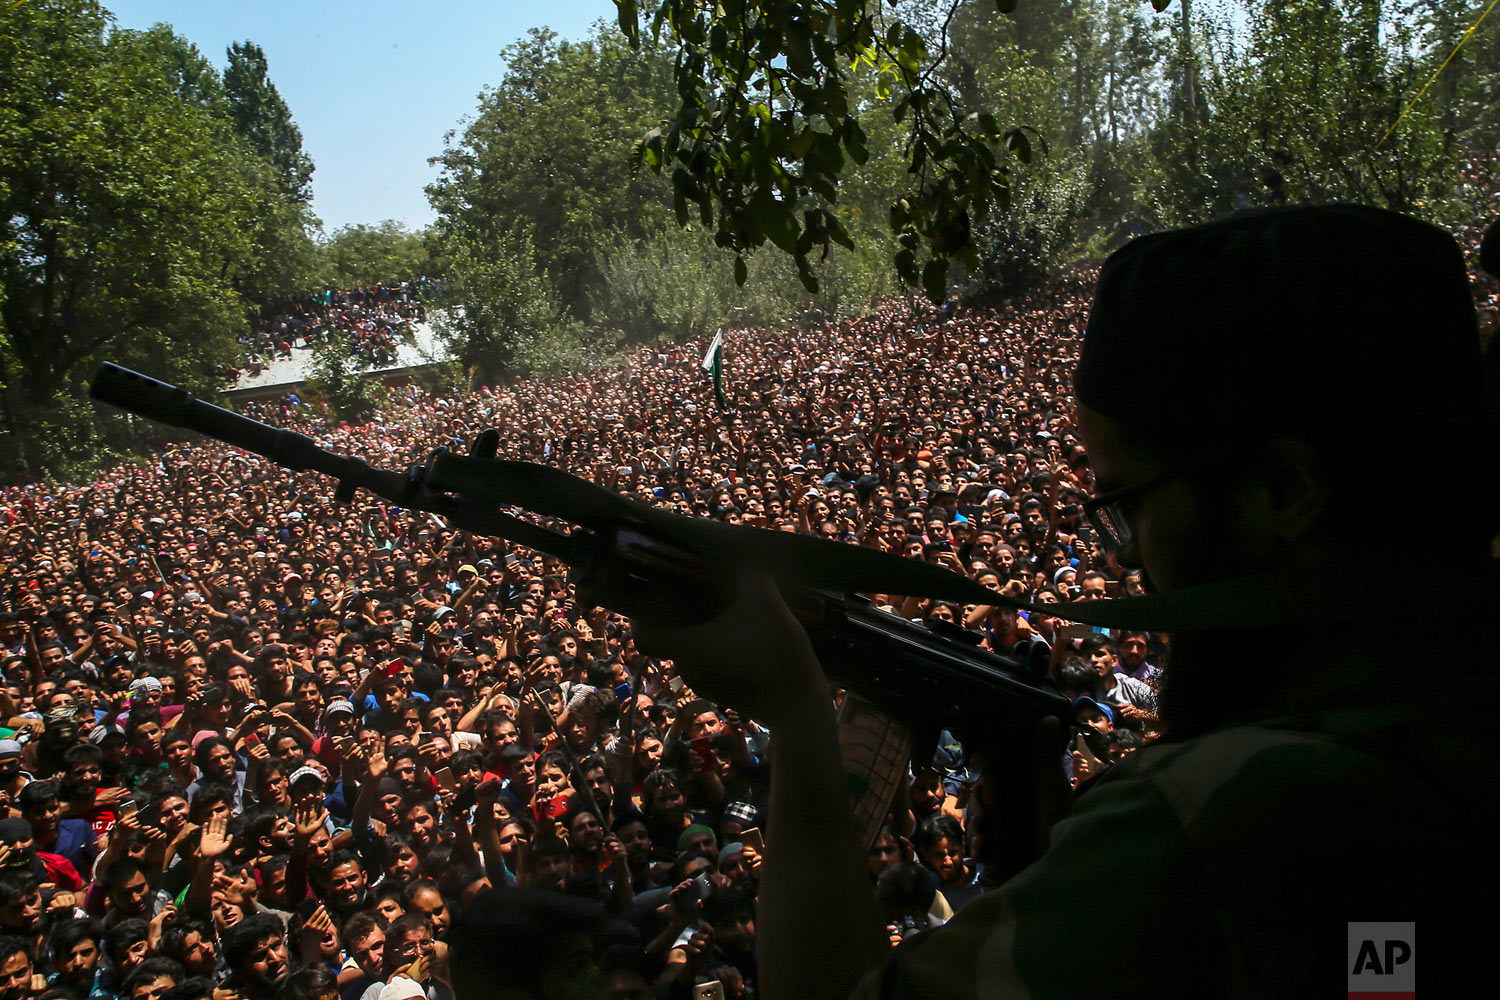  A Kashmiri rebel fires his gun to salute fallen comrades during their joint funeral in Malikgund village, south of Srinagar, Indian controlled Kashmir, Saturday, Aug. 4, 2018. At rebels and an Indian army soldier were killed in gunbattles in dispute